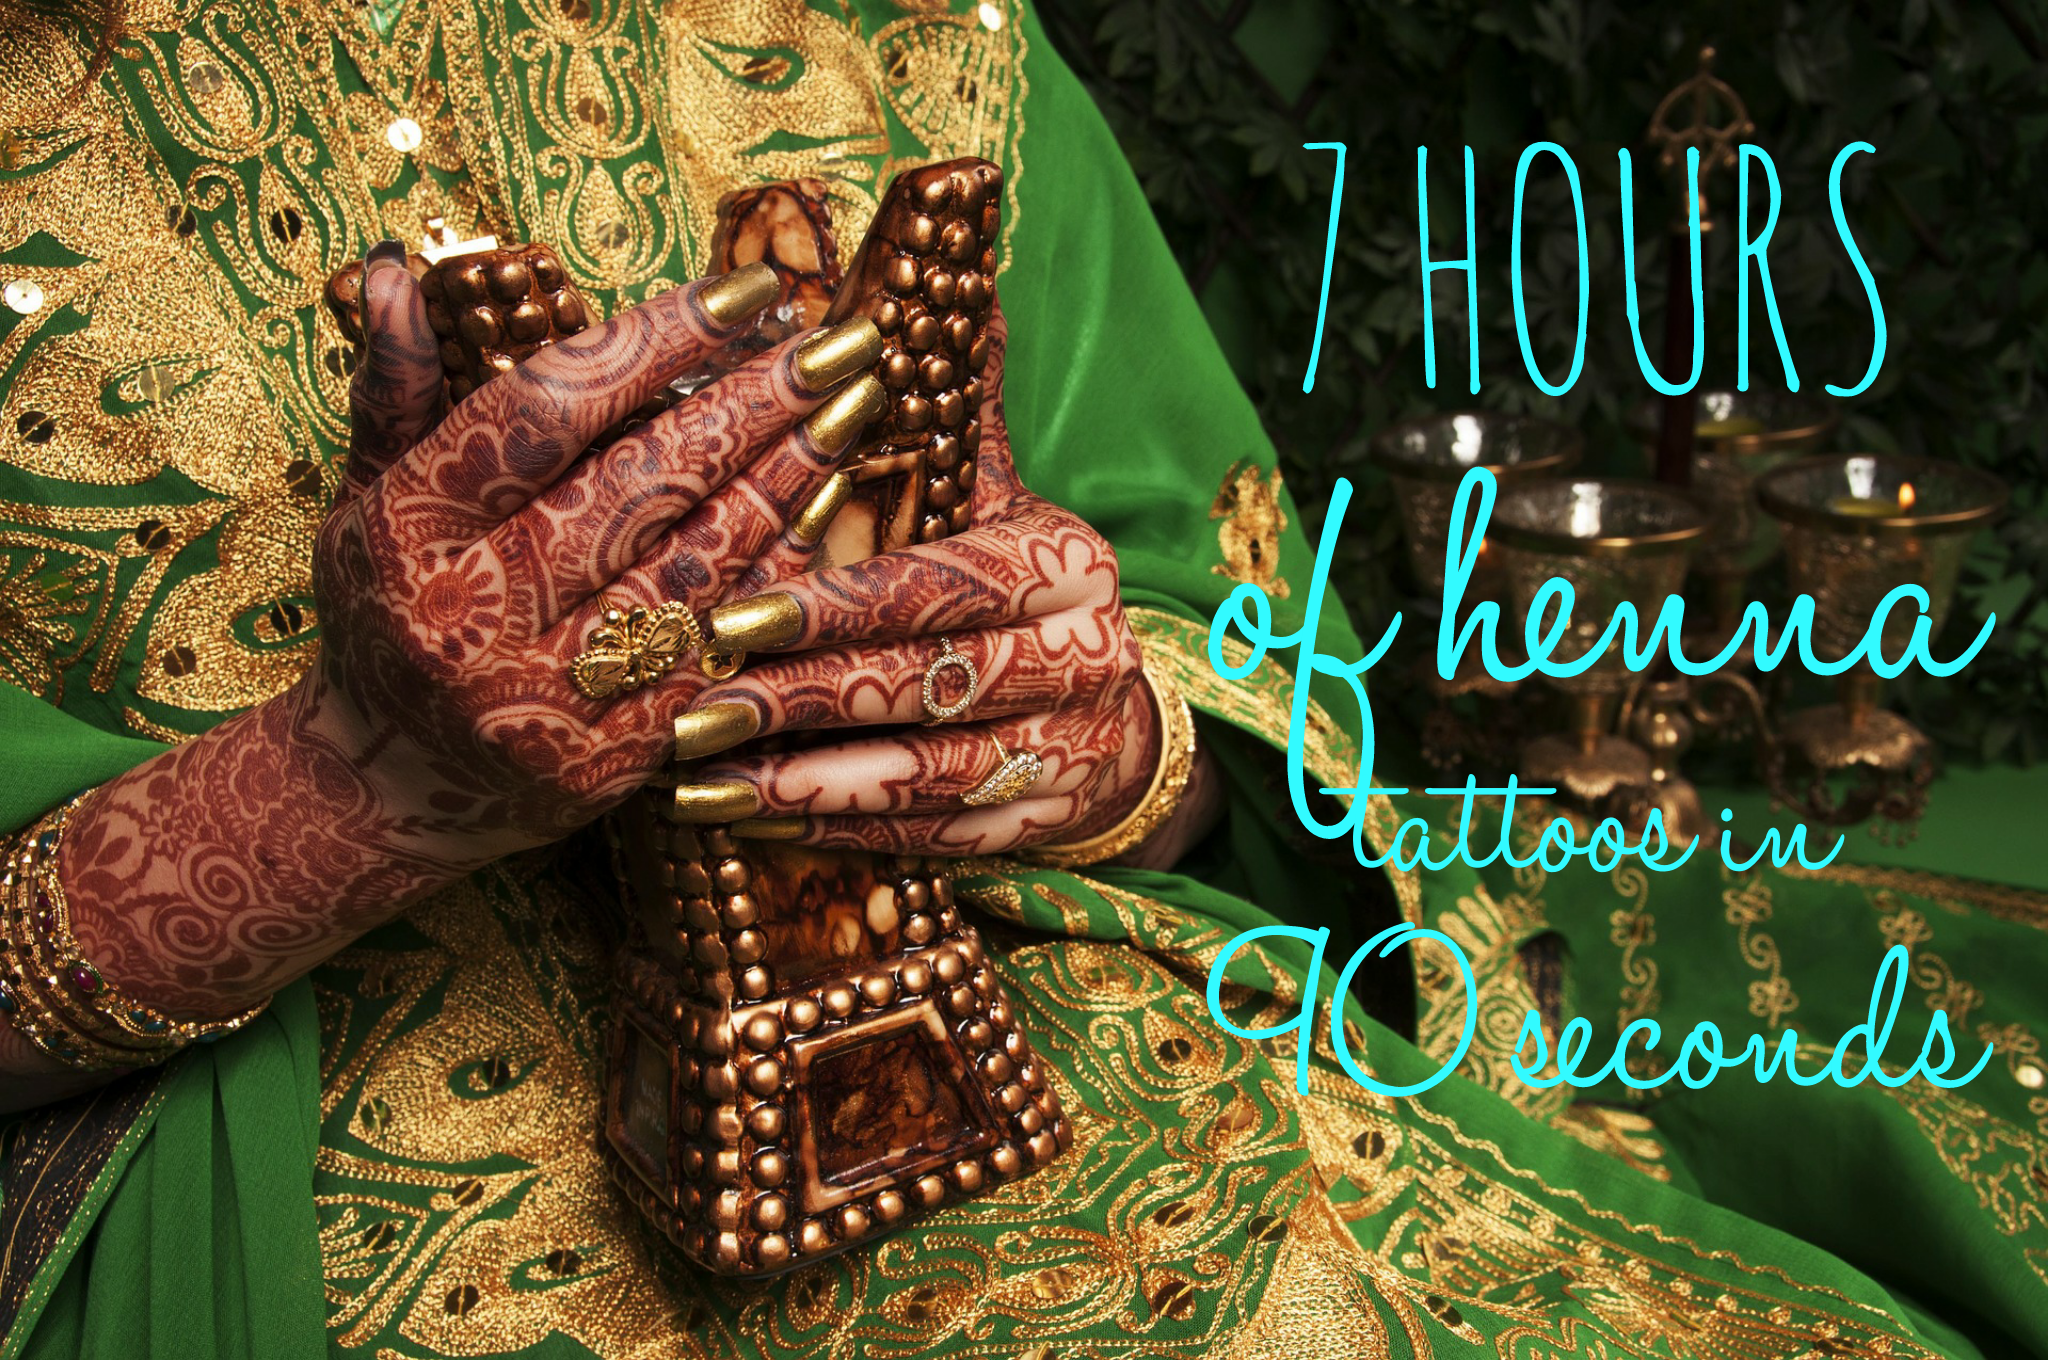 The Art of Henna (7 Hours Of Henna Tattoos In 90 Seconds)